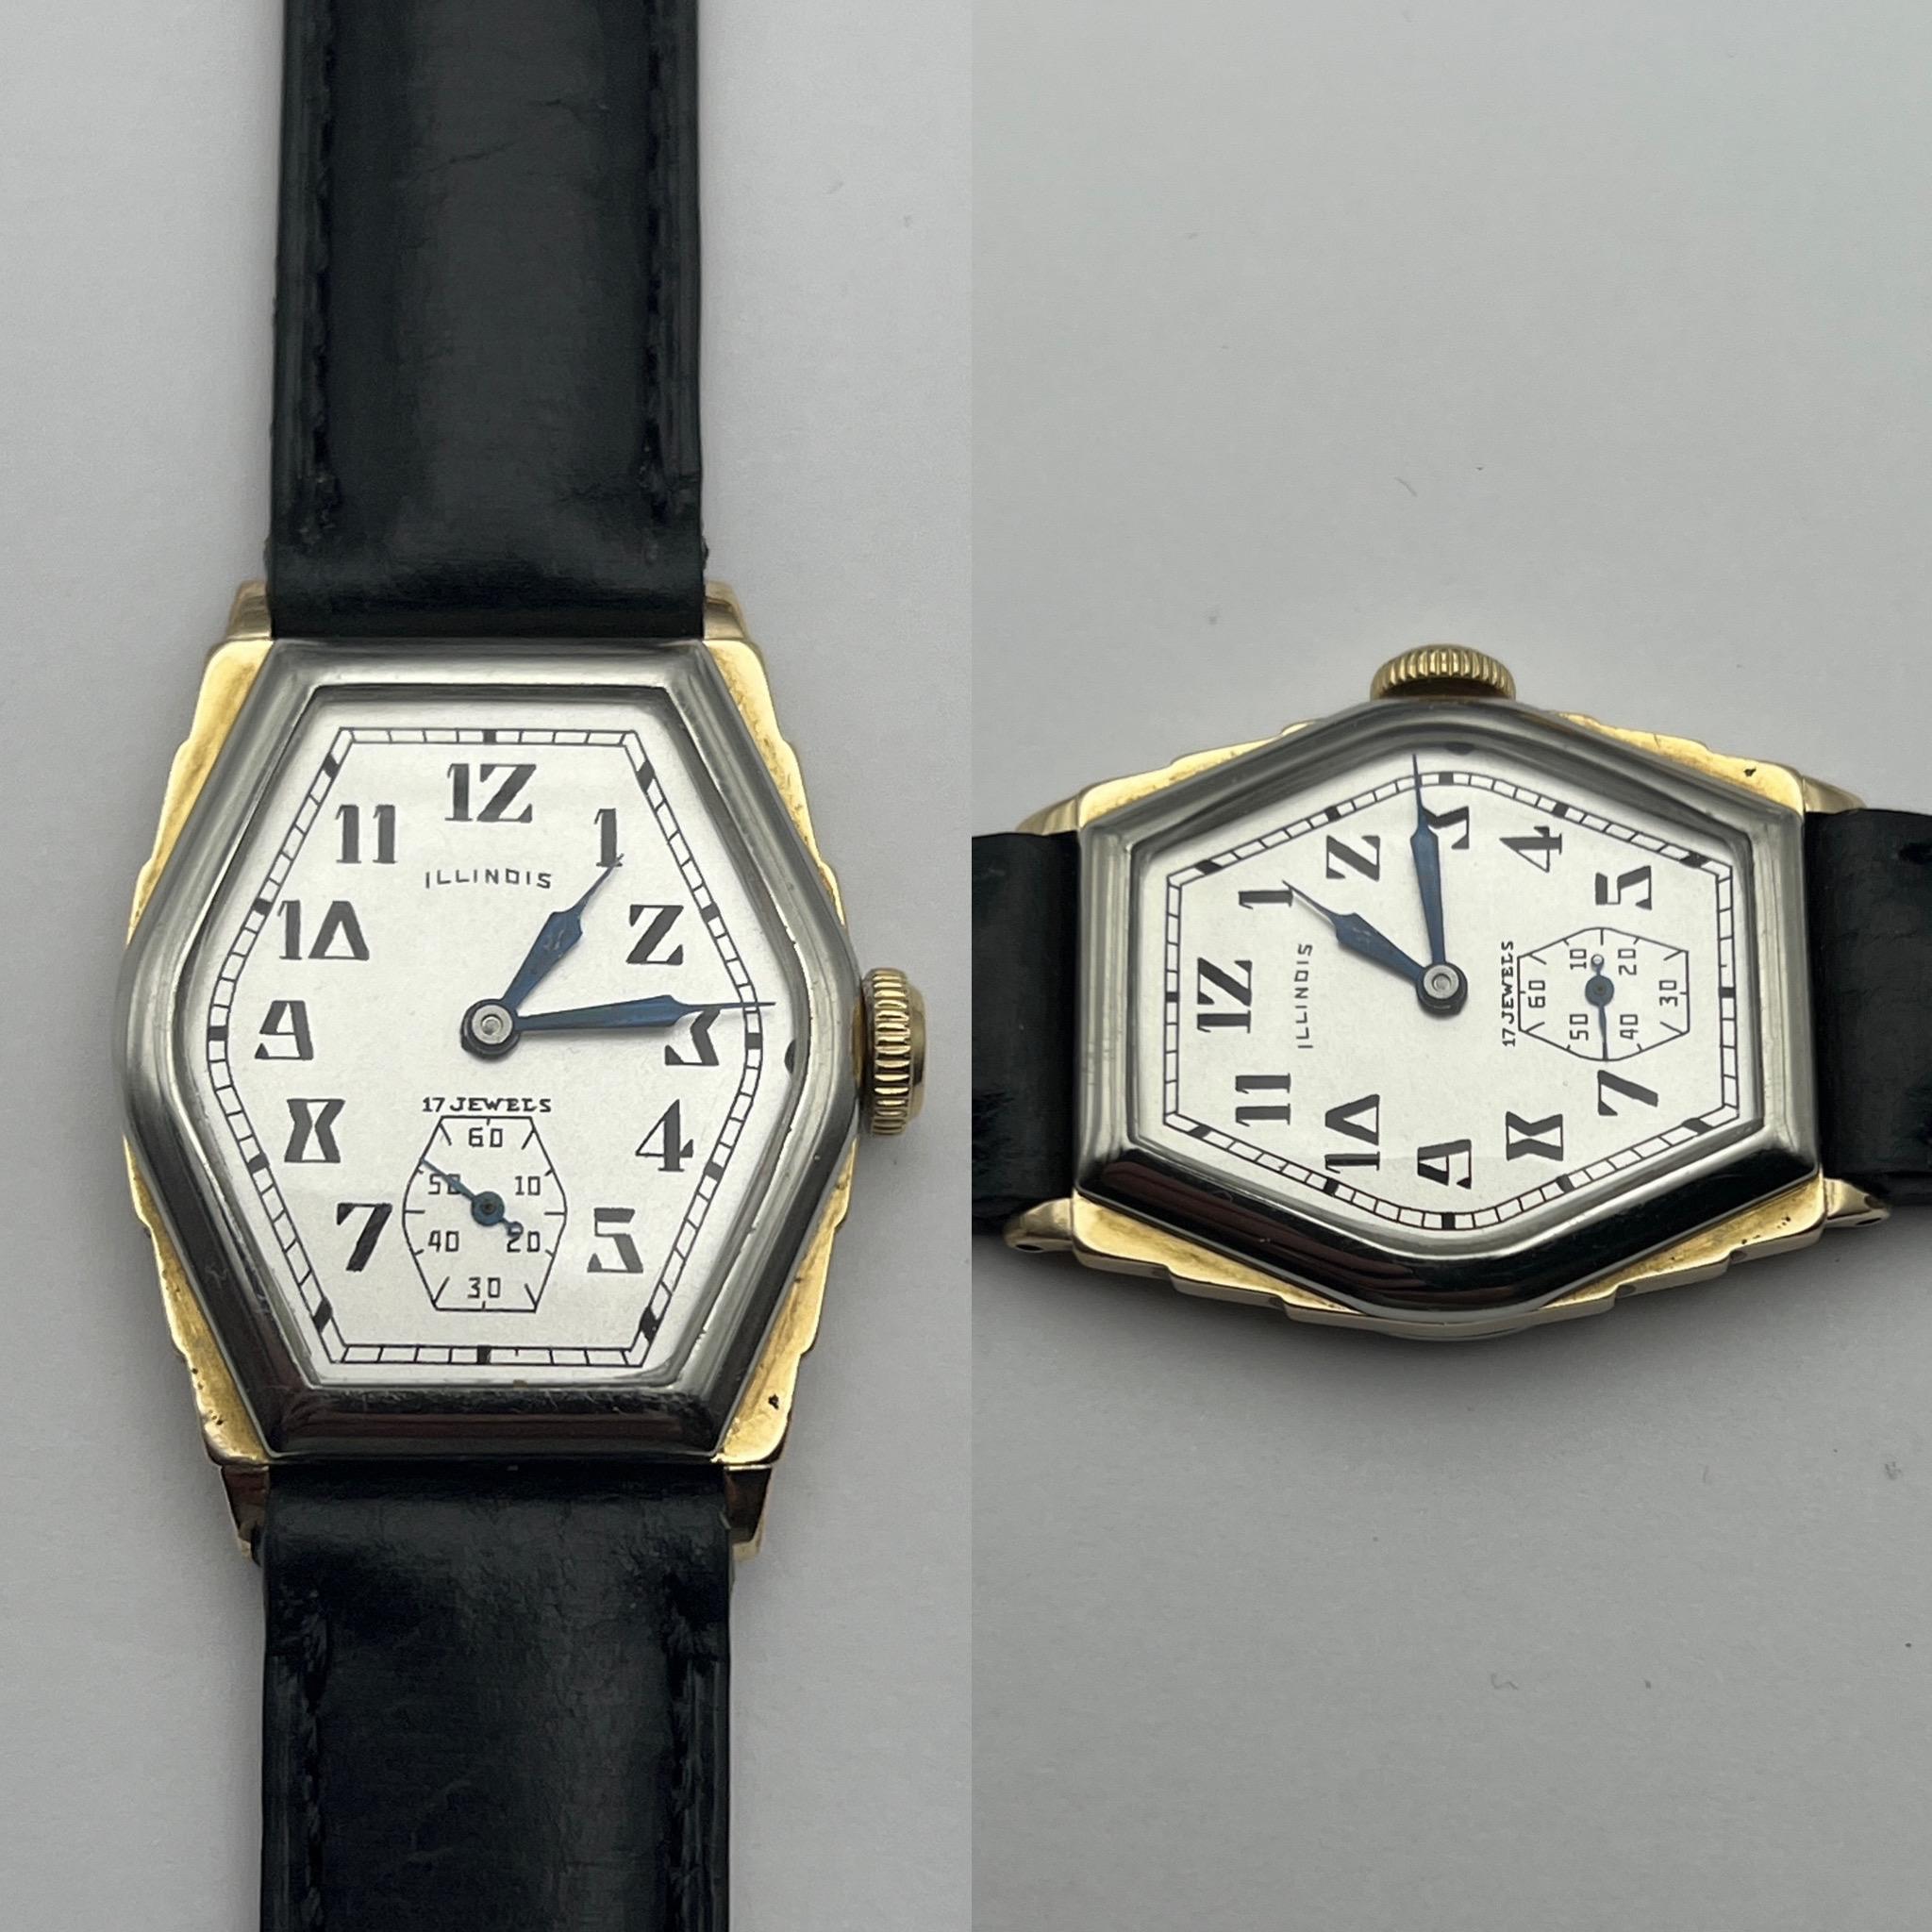 The Illinois watch company has long been considered the greatest American Watch Company that had an early demise to management and the great depression. The made some of the best movements of their day. 

One word describes this watch: “Ritz” ! A